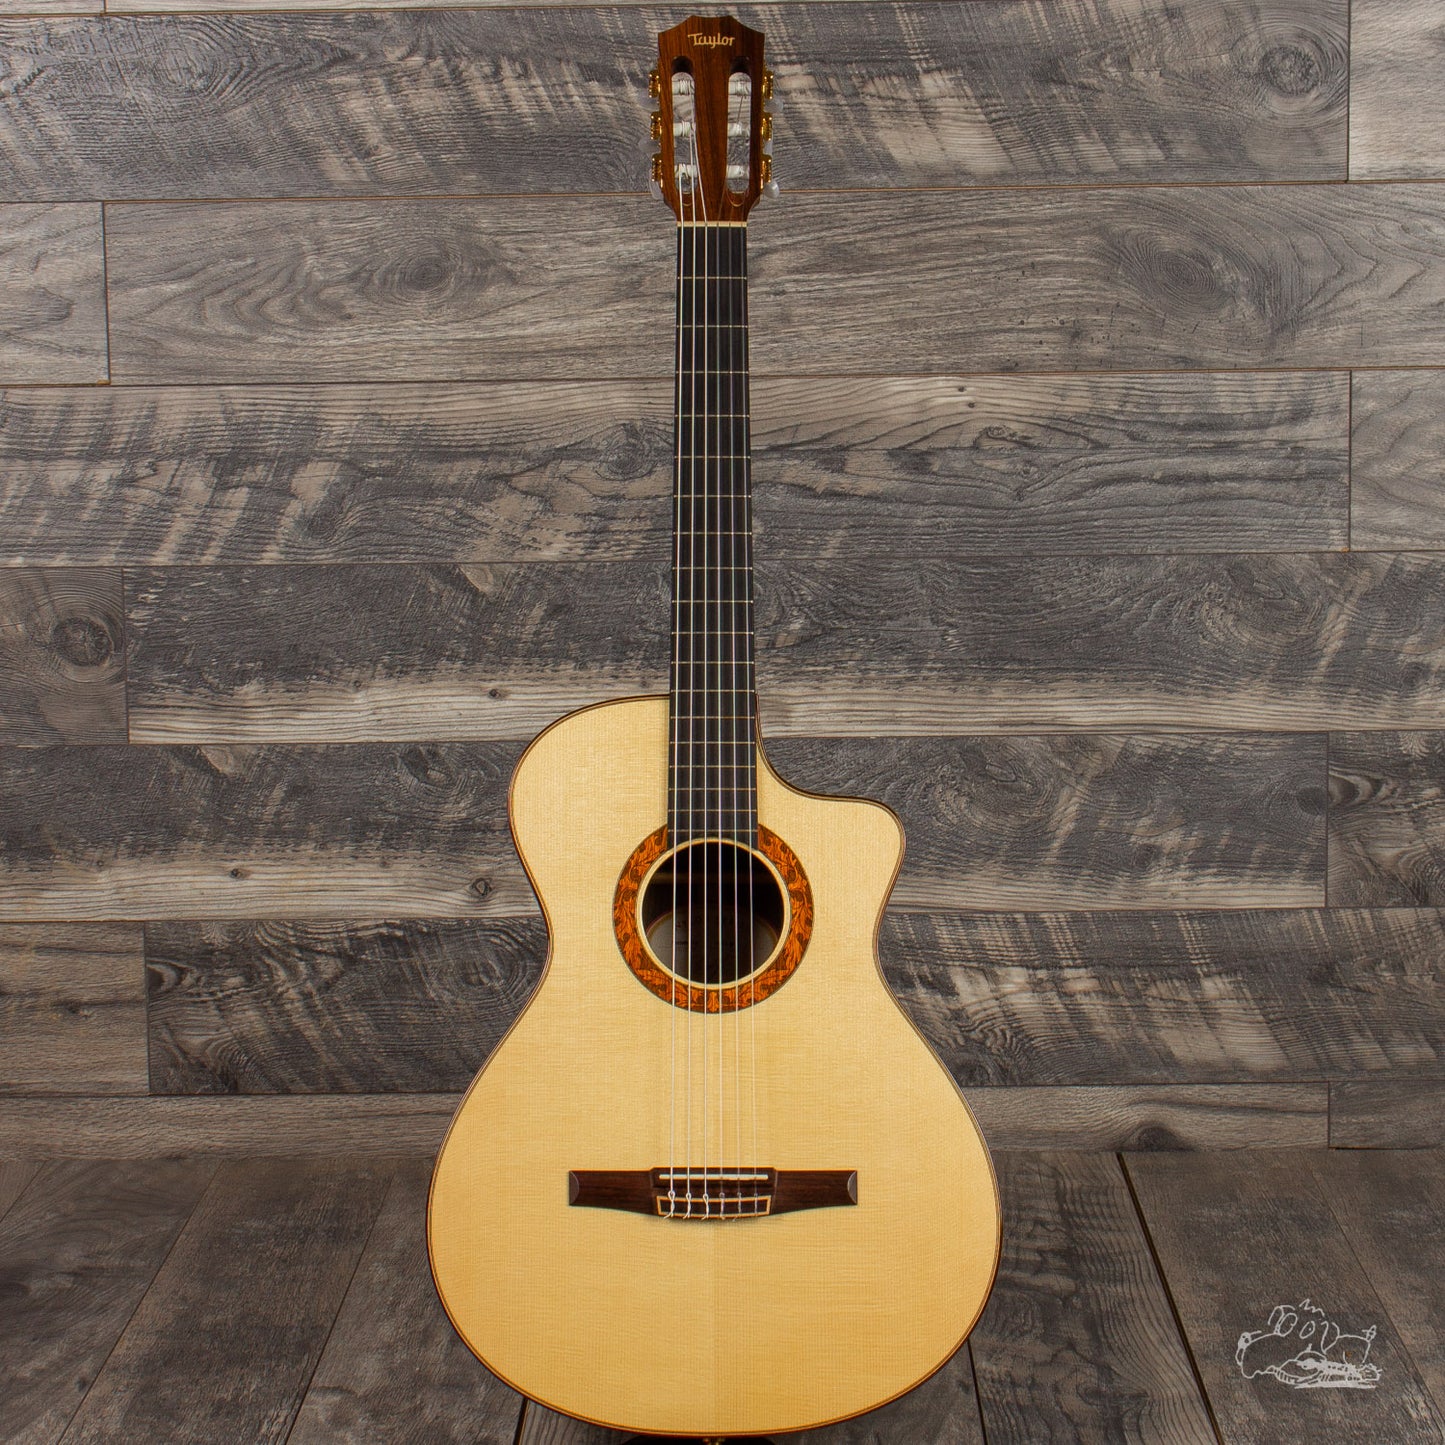 2002 Taylor NS72-BC - Brazilian Rosewood - Only 50 Made in 2002.